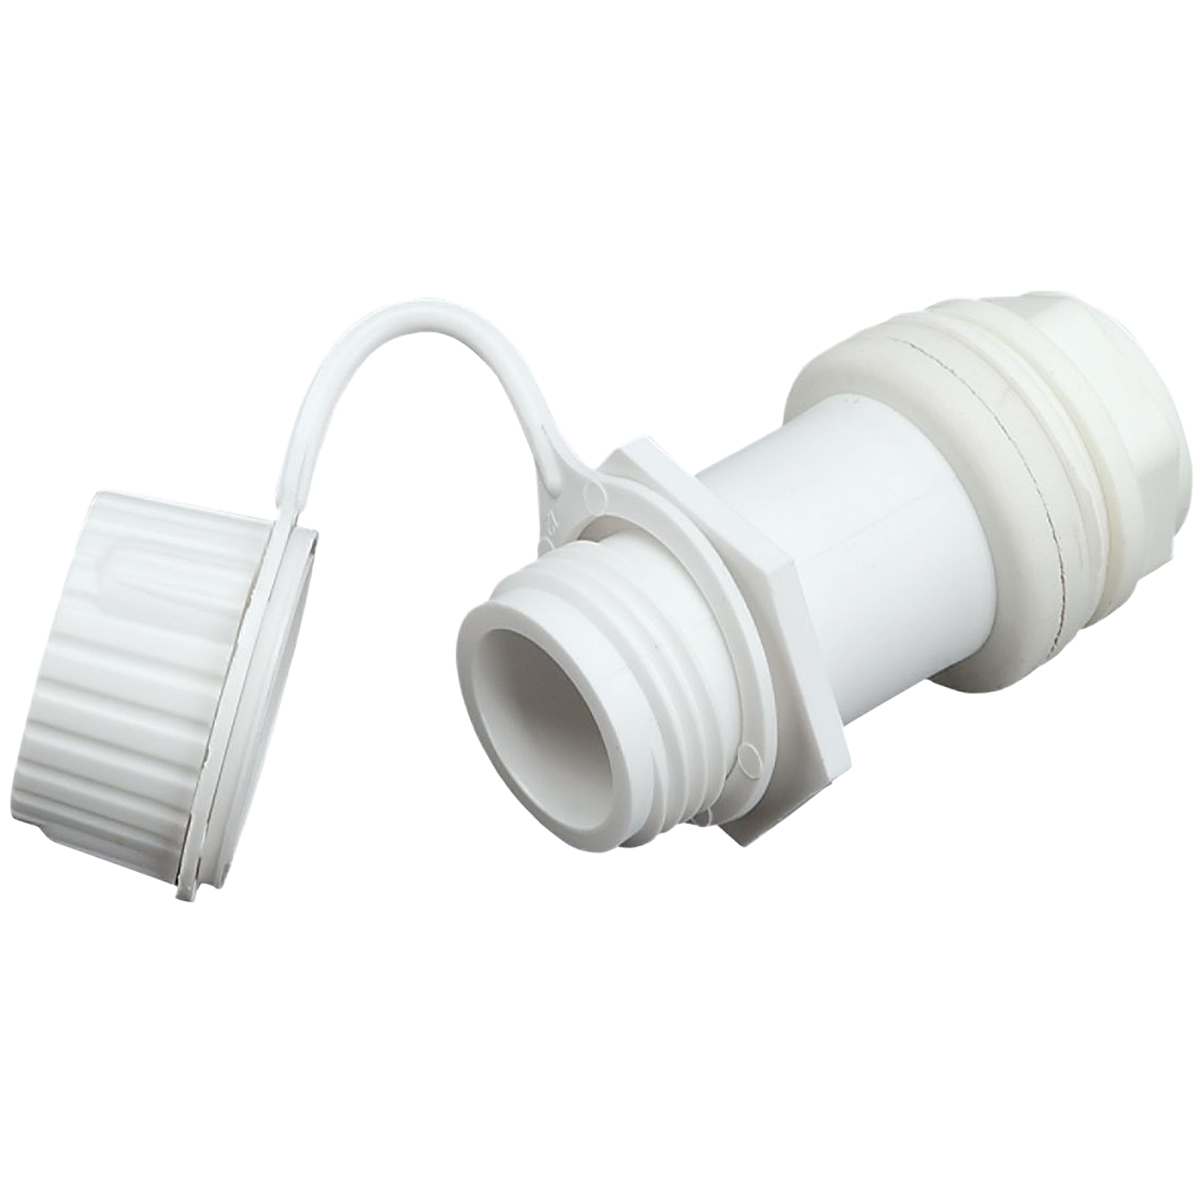 Igloo 24011 White Replacement Threaded Drain Plug For 50 To 165 Qt. Coolers - image 1 of 2